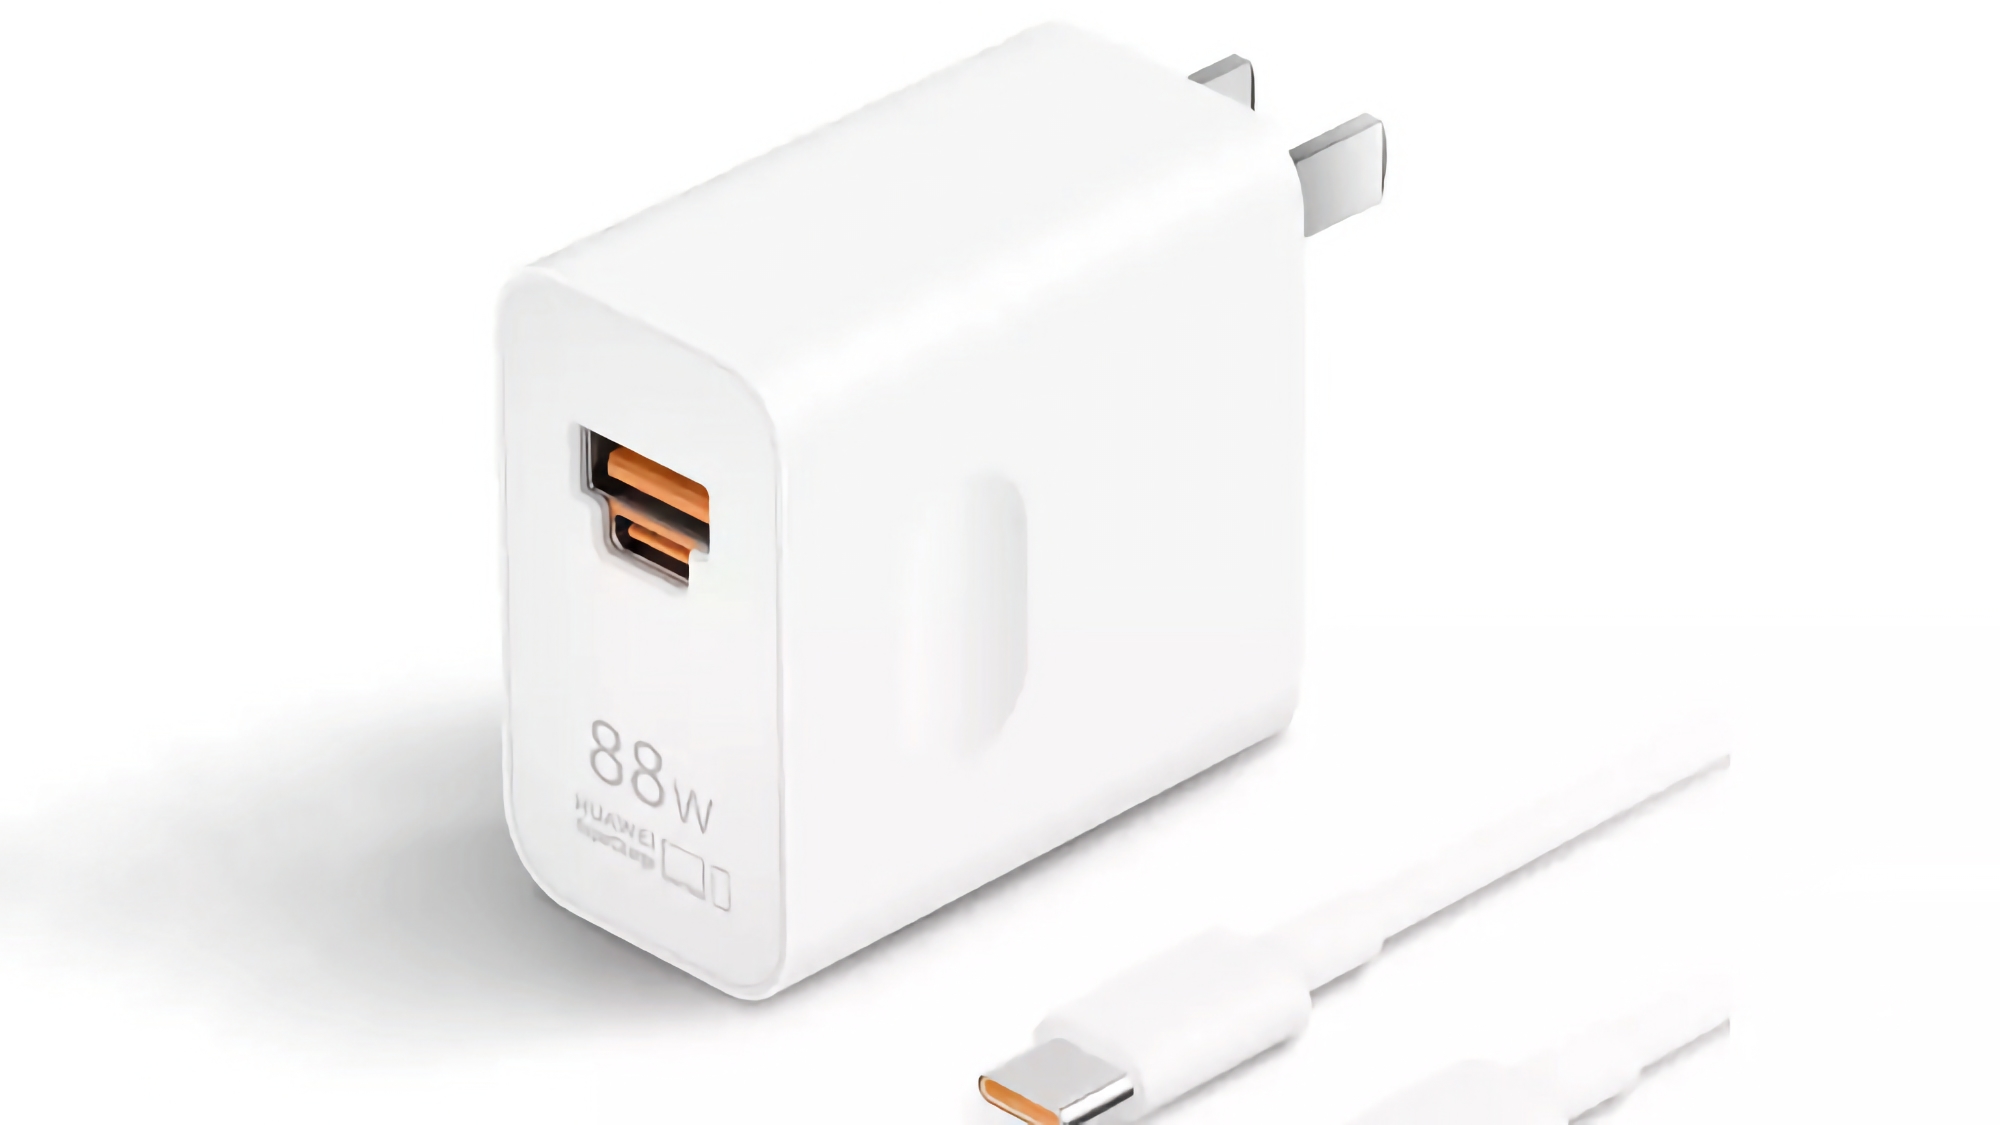 Huawei unveils dual USB charger with 88W of power for $36